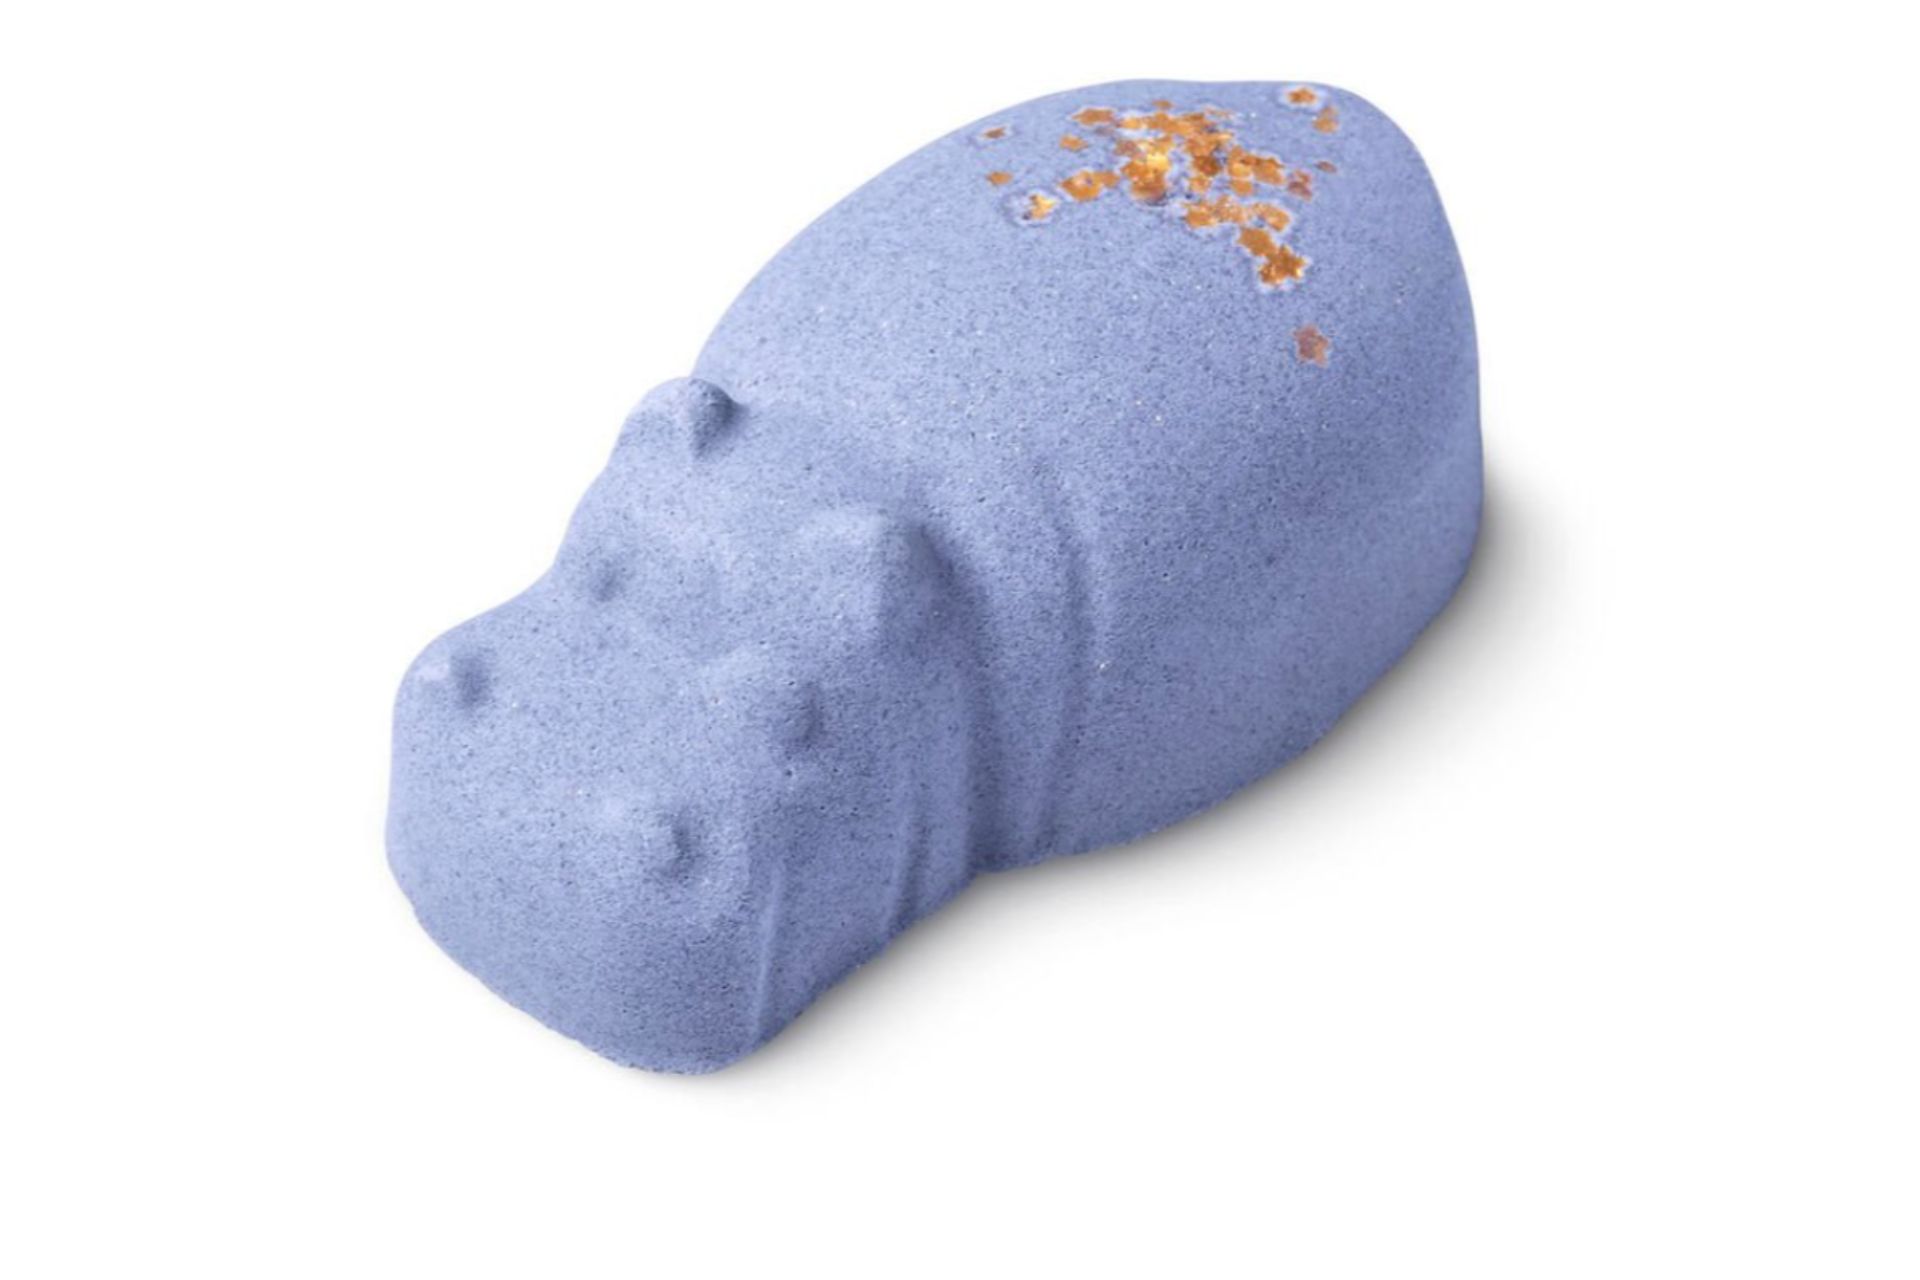 purple hippo bath bomb with gold leaf on its back